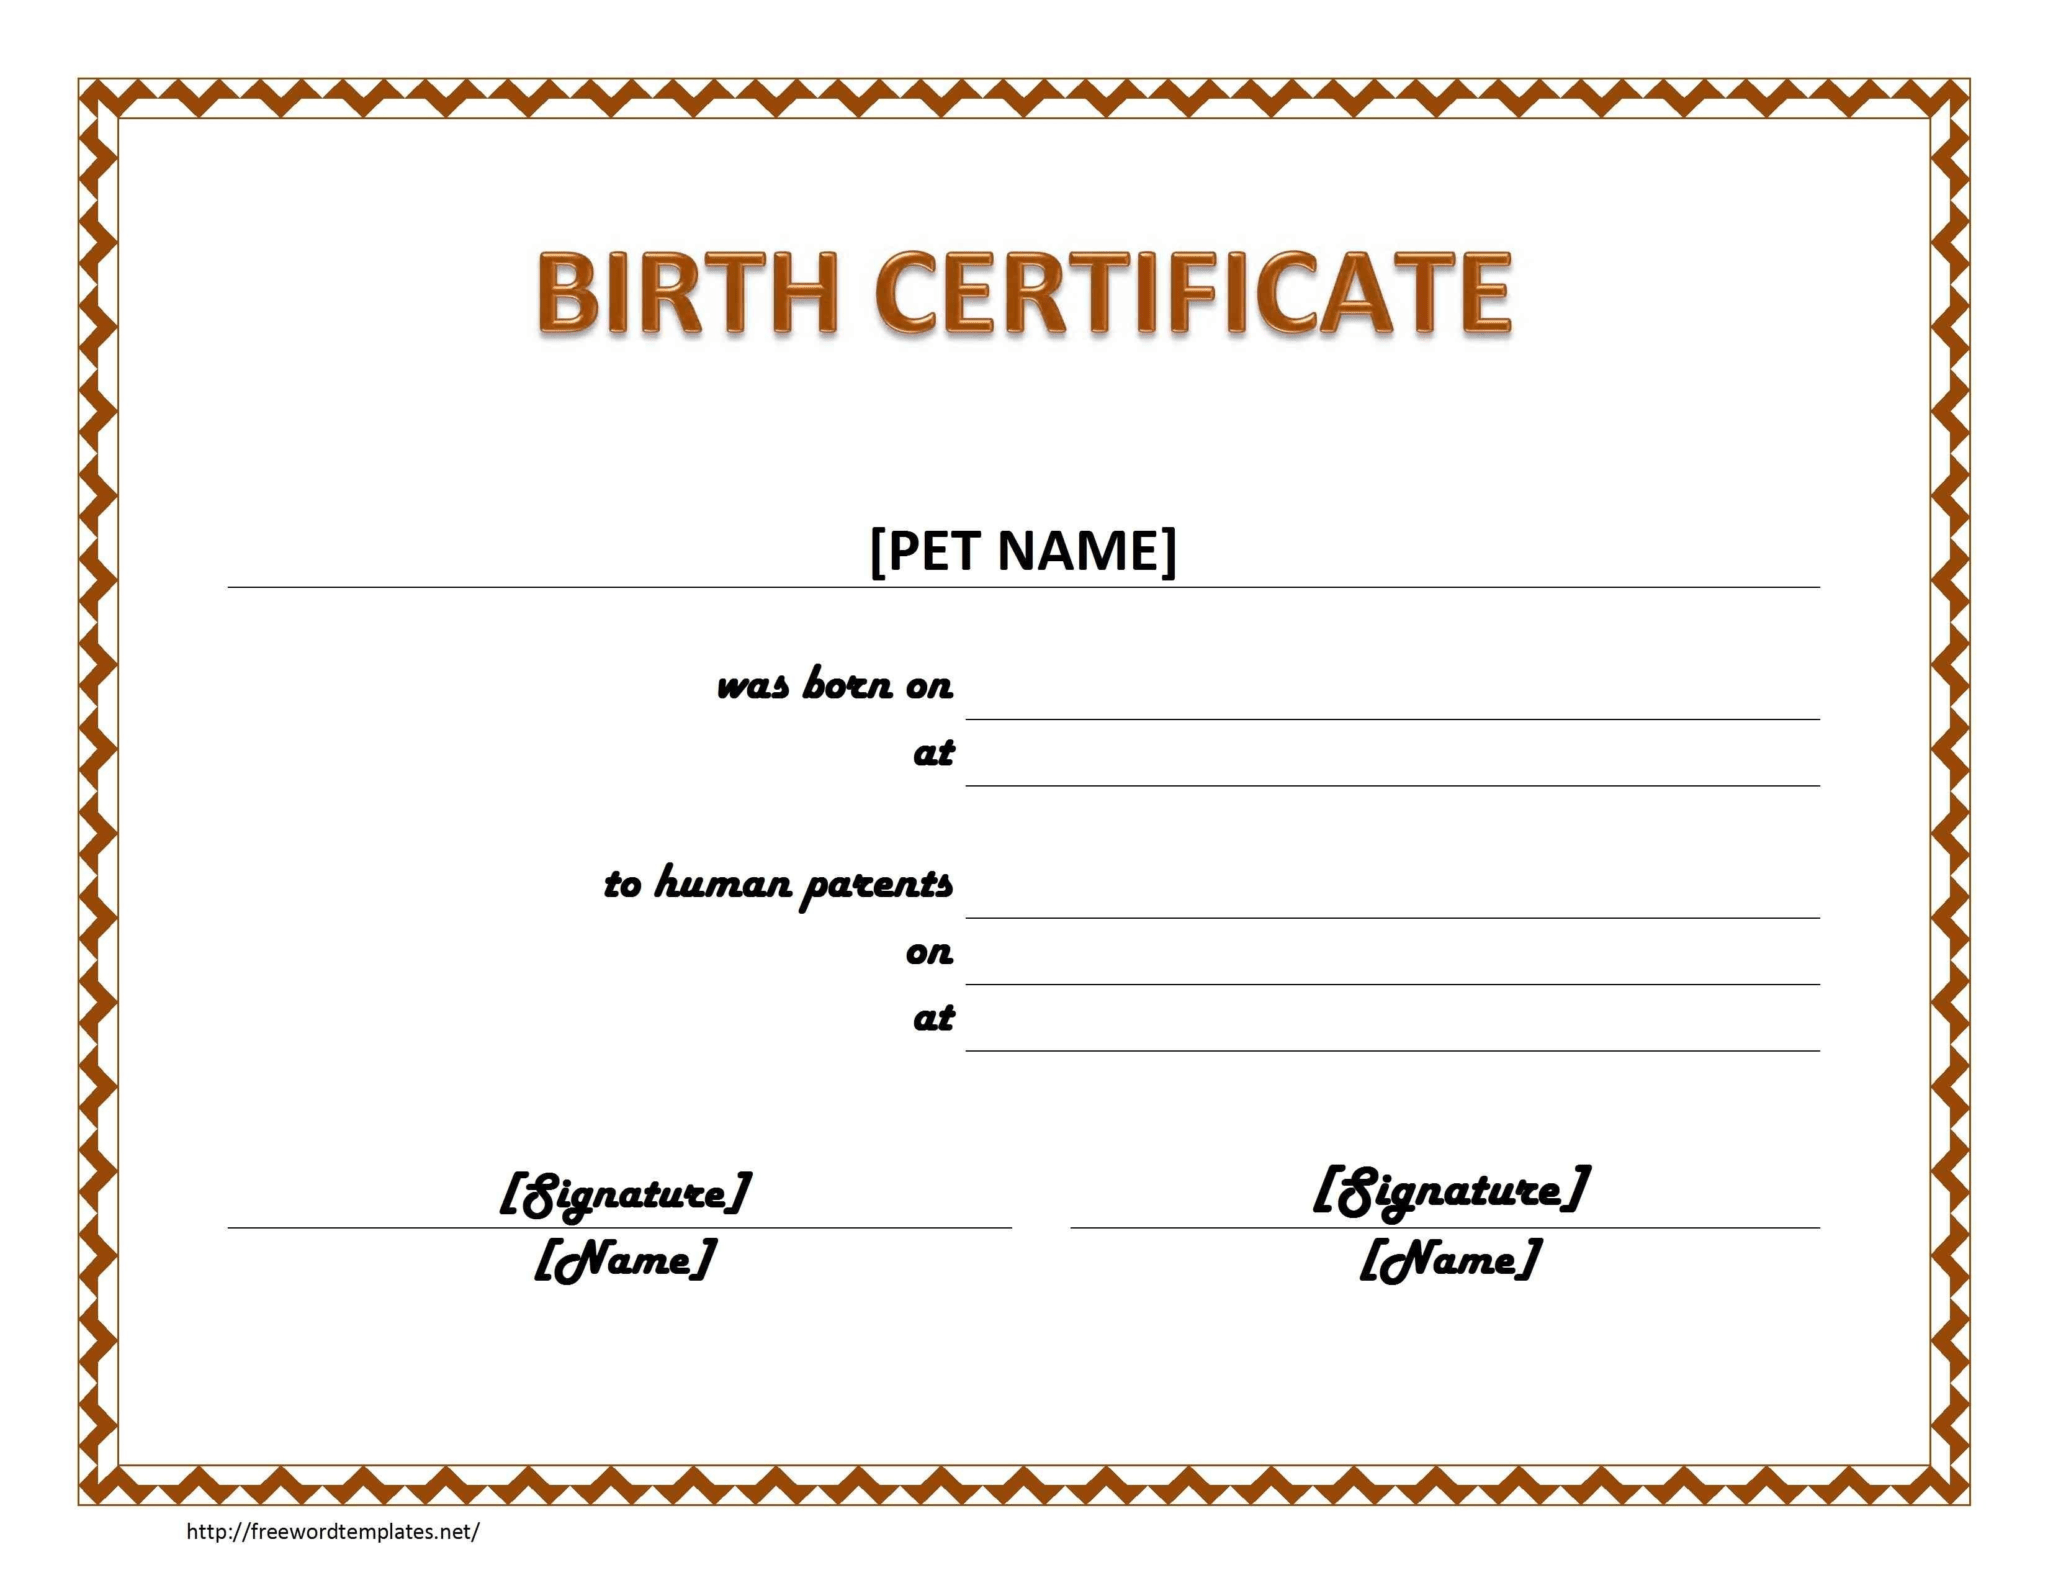 Blank Birth Certificate Template For Elements Novelty Images Within